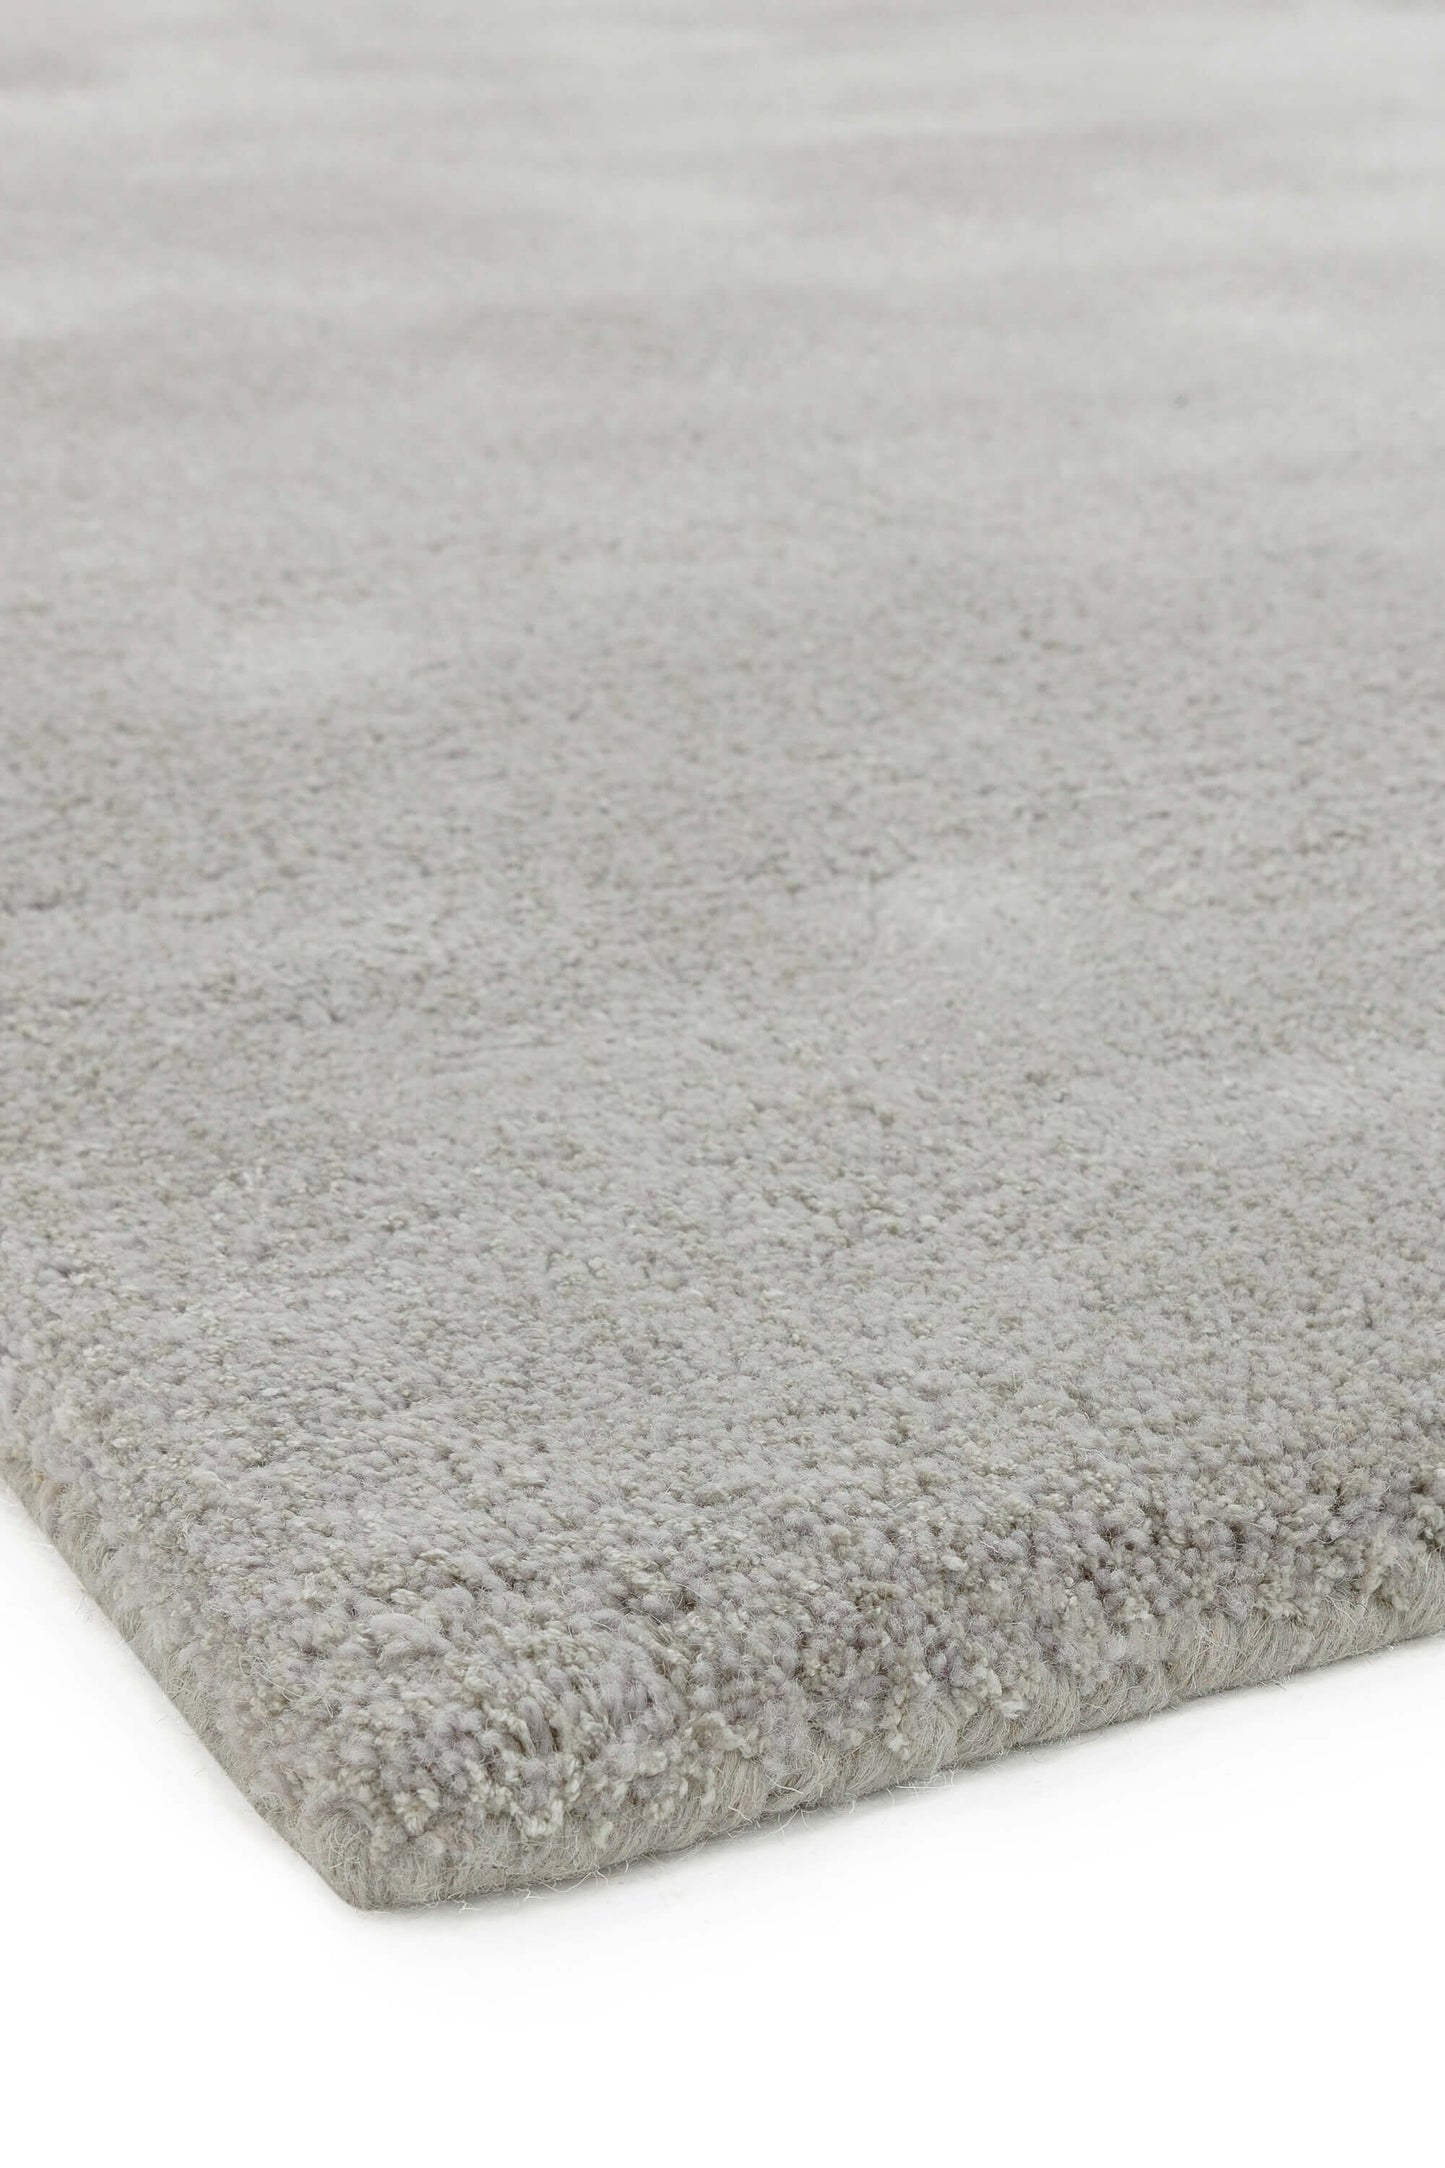 Asiatic Carpets Aran Hand Woven Rug Feather Grey - 160 x 230cm